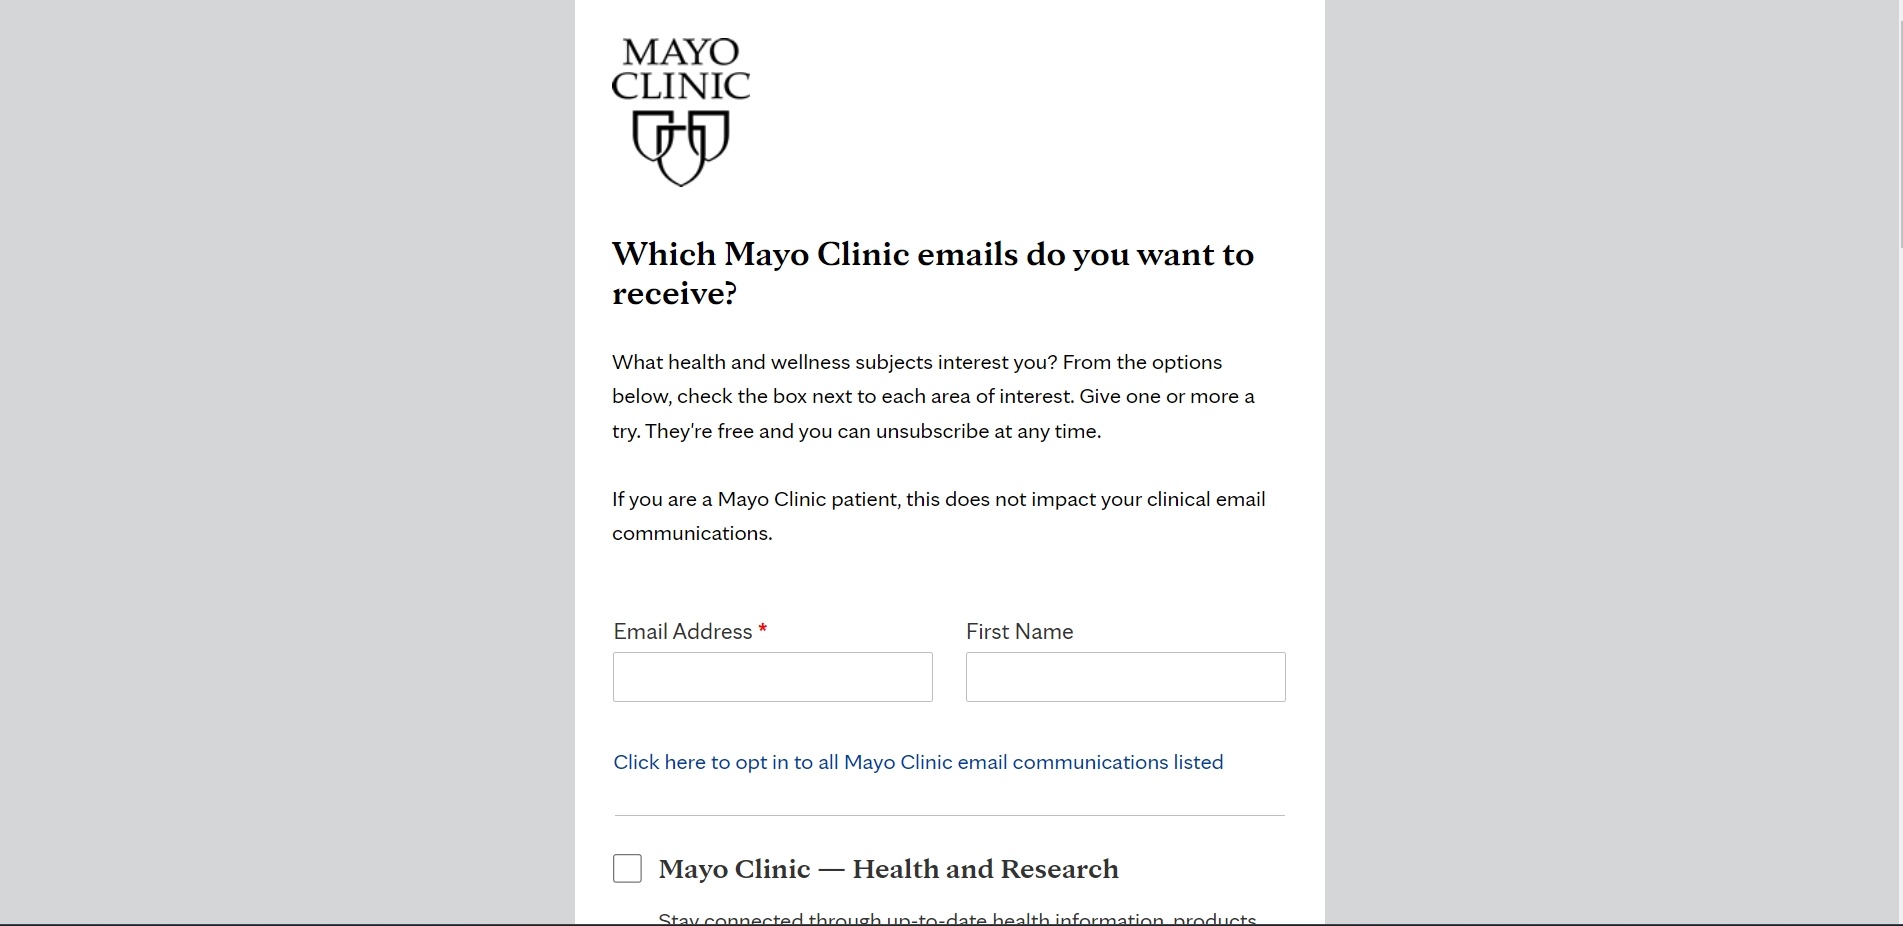 Mayo Clinic has a sign up offer for a newsletter